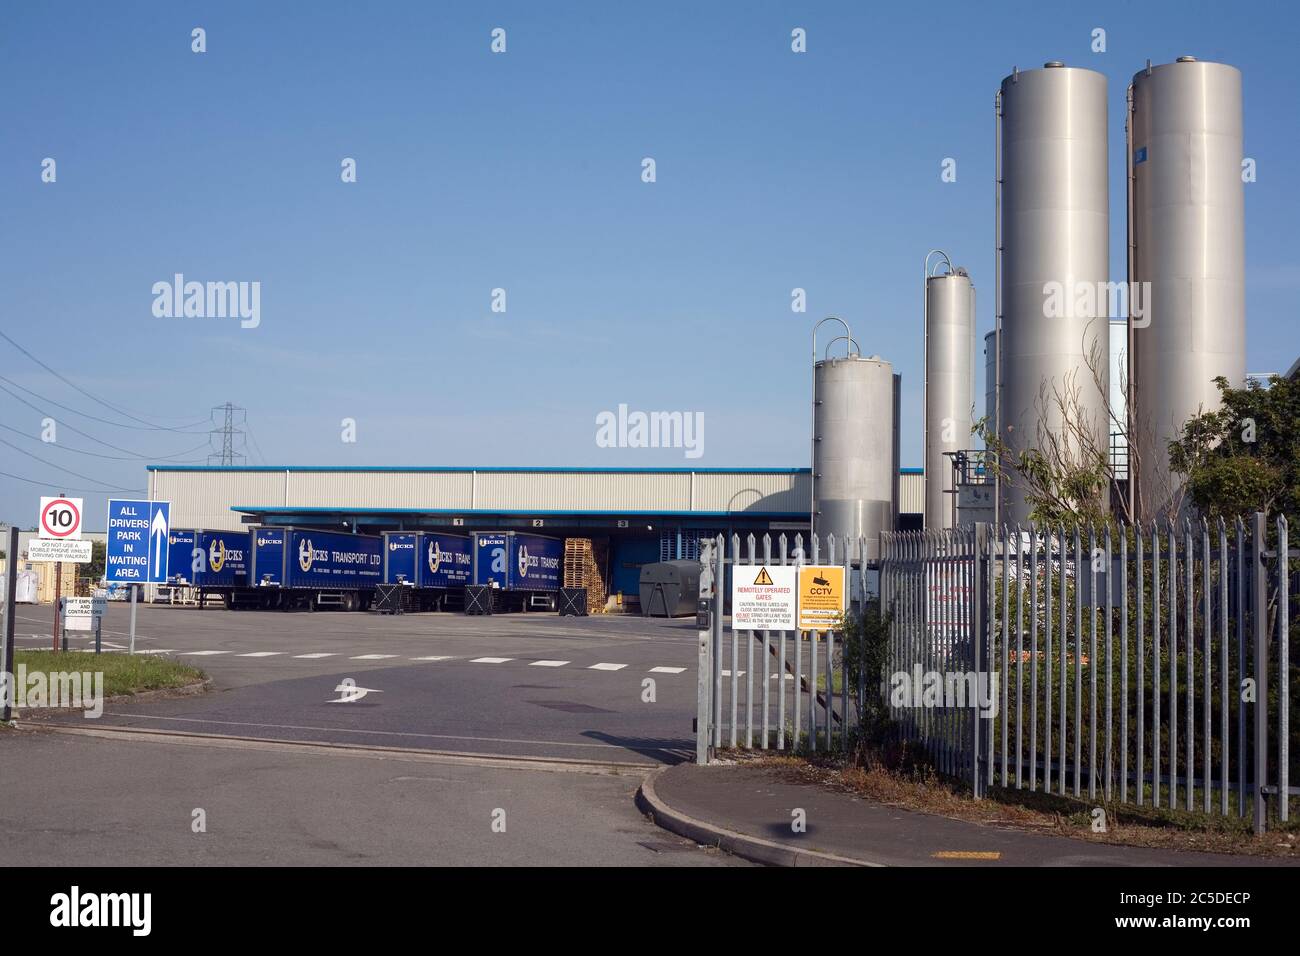 RPC Tedeco Gizeh, makers of plastic cups, factory at Kenfig industrial estate with Hicks transport lorries Stock Photo